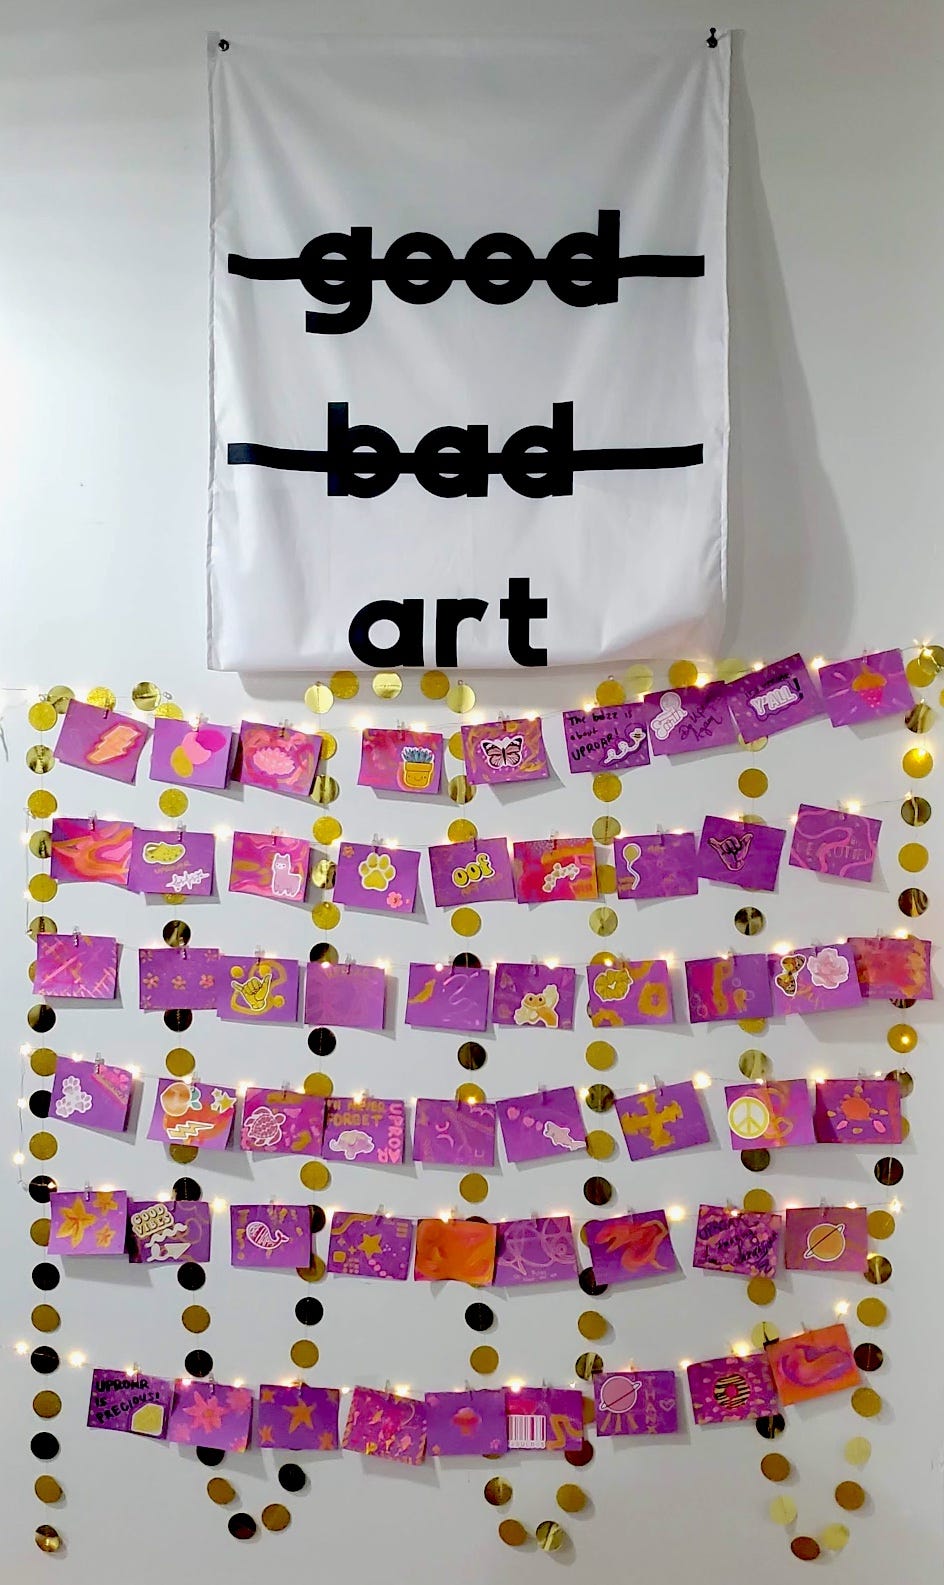 A white flag with black text reading "good (crossed out) bad (crossed out) art" hangs above a collection of purple and postcards, decorated by Uproar participants. They are hanging among large gold sequins on strings of twinkle lights.